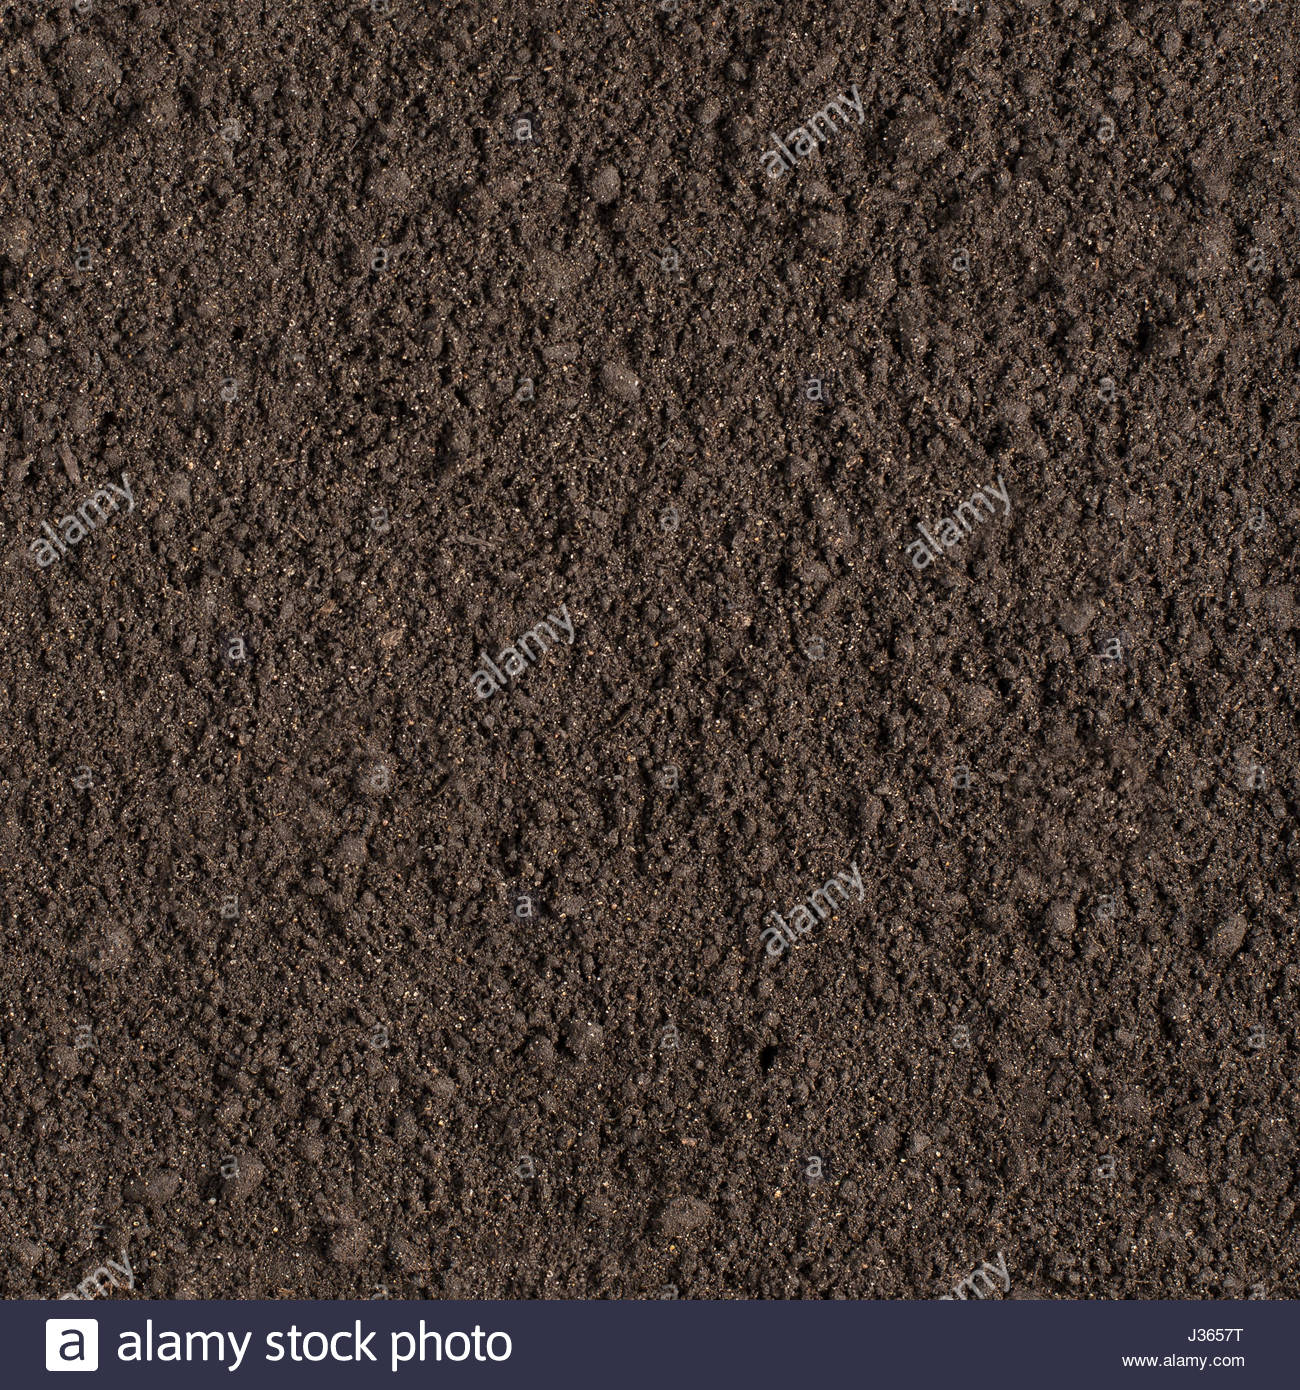 Seamless Soil Texture Can Be Used As Pattern To Fill Background